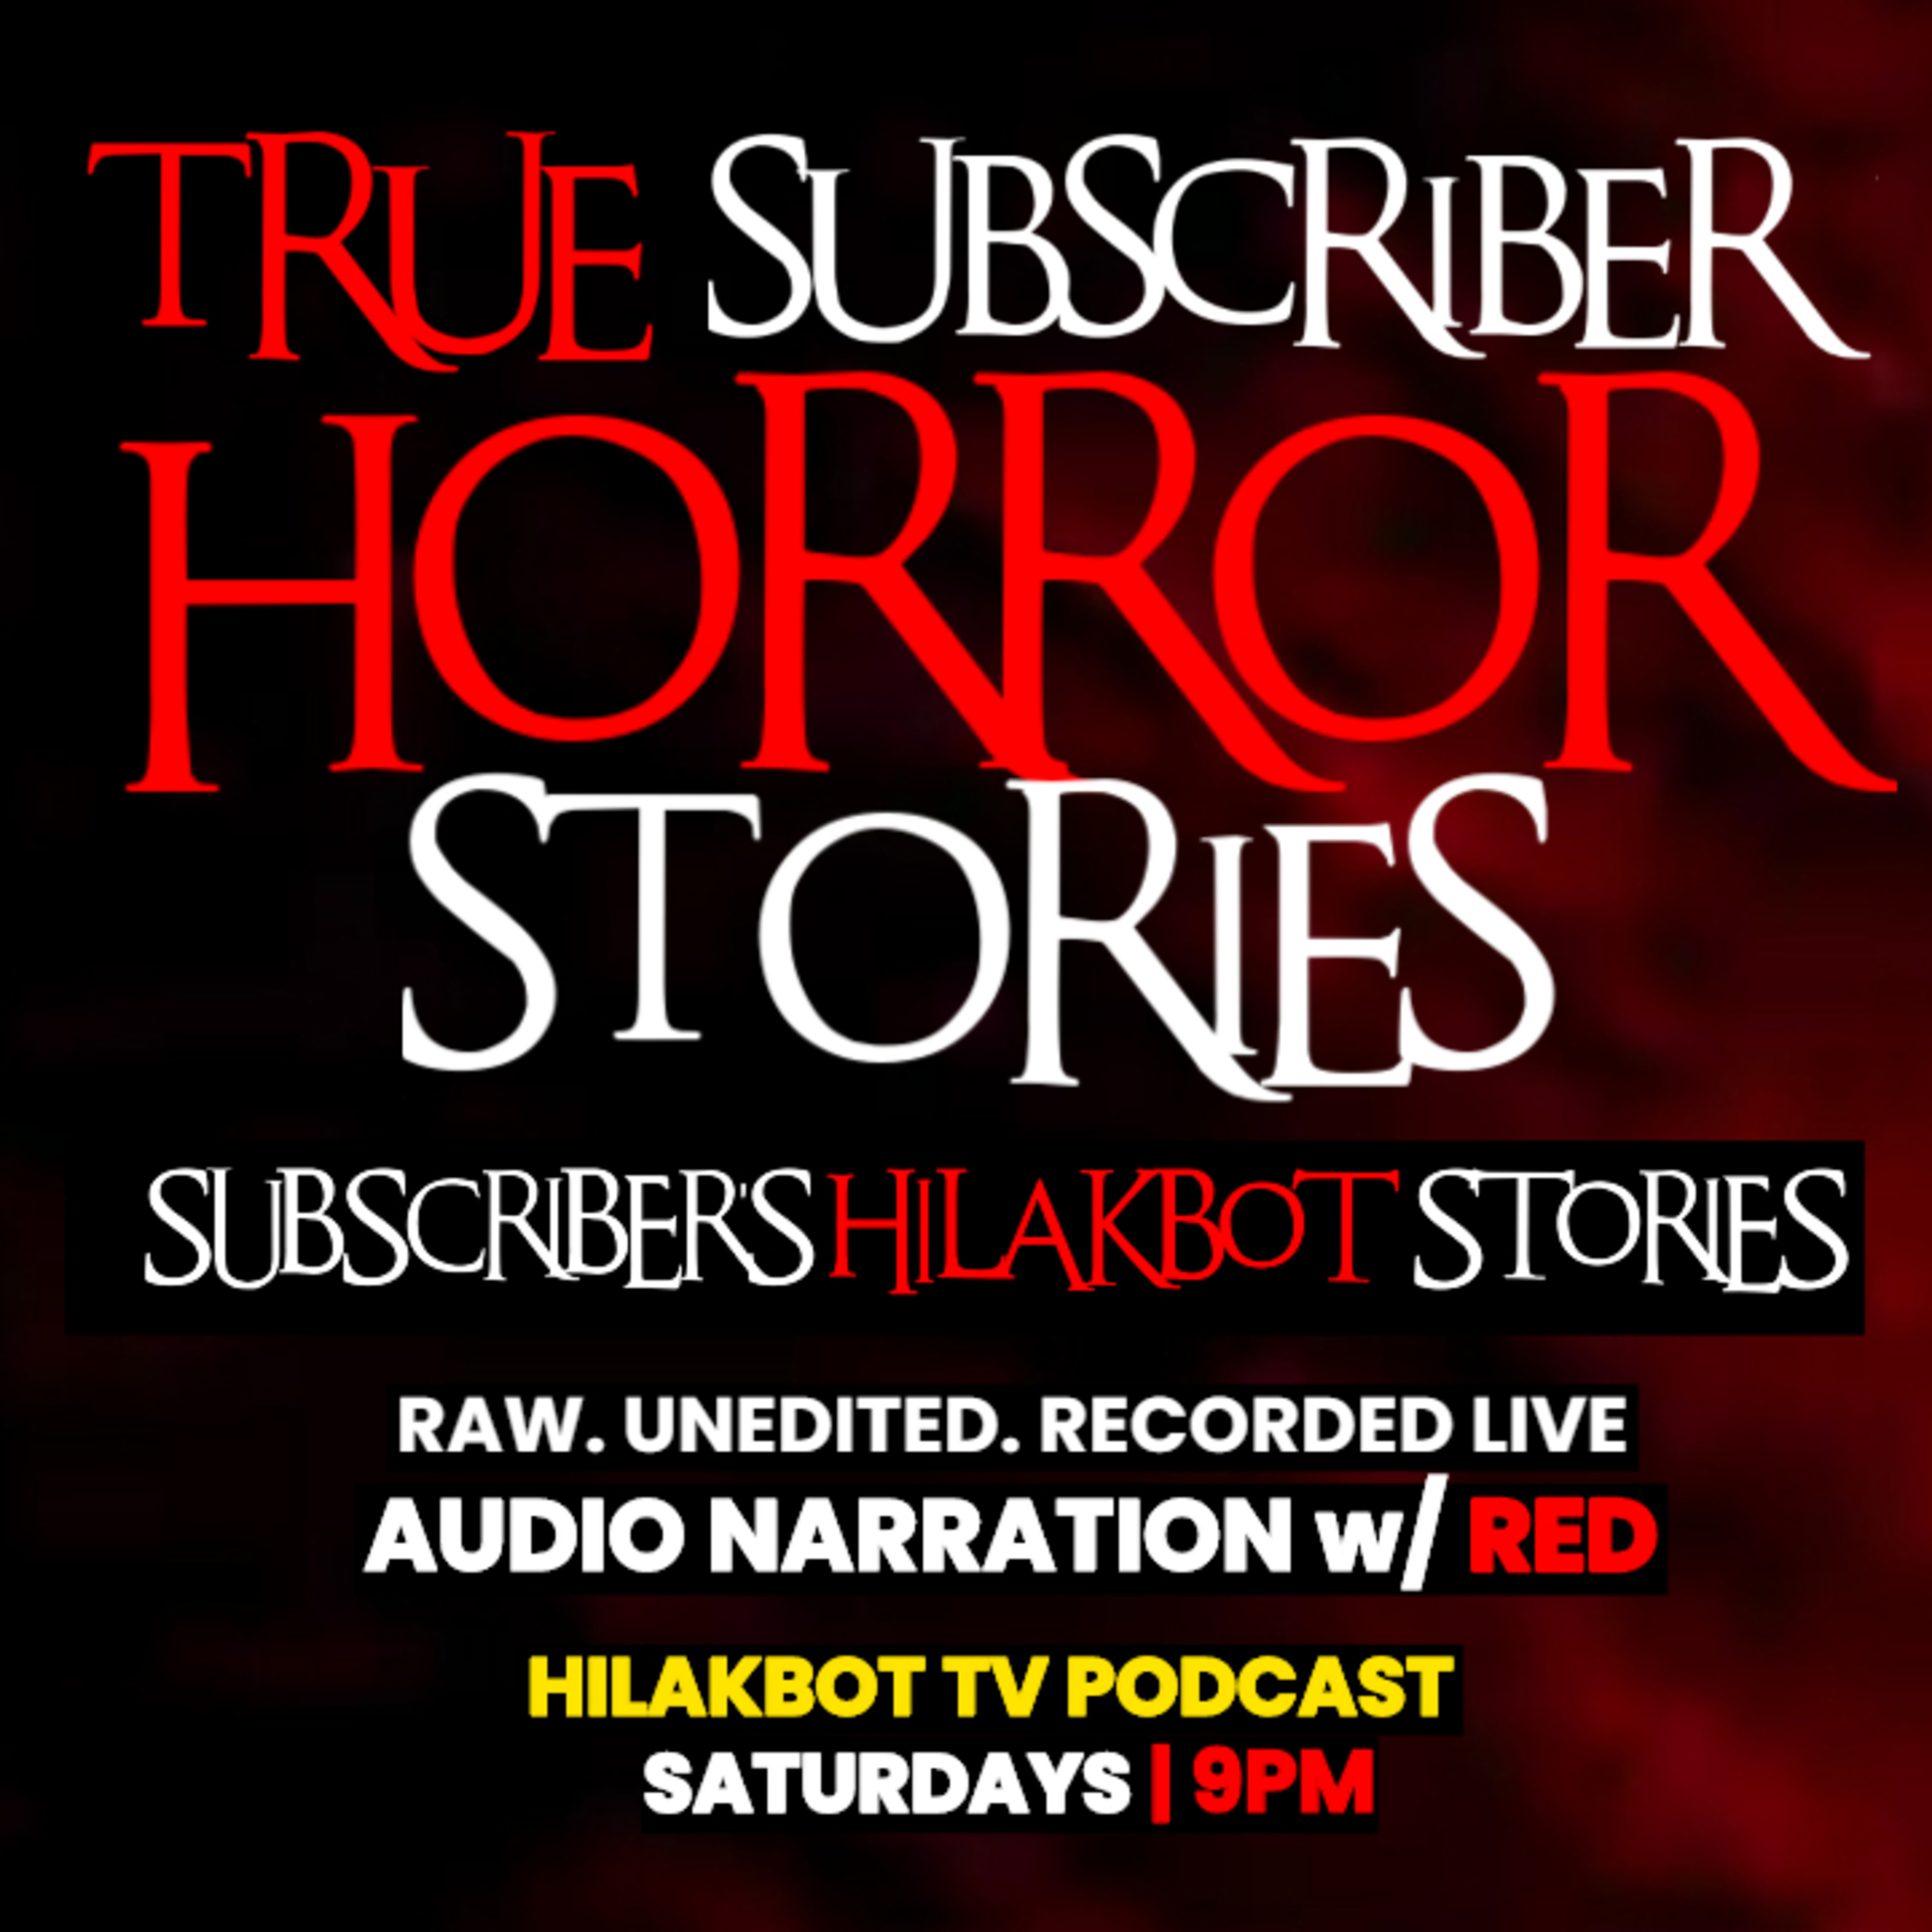 SUBSCRIBER'S HILAKBOT STORIES EPISODE 31 - Live Narration w/ RED | Listener's Submitted True Scary Stories